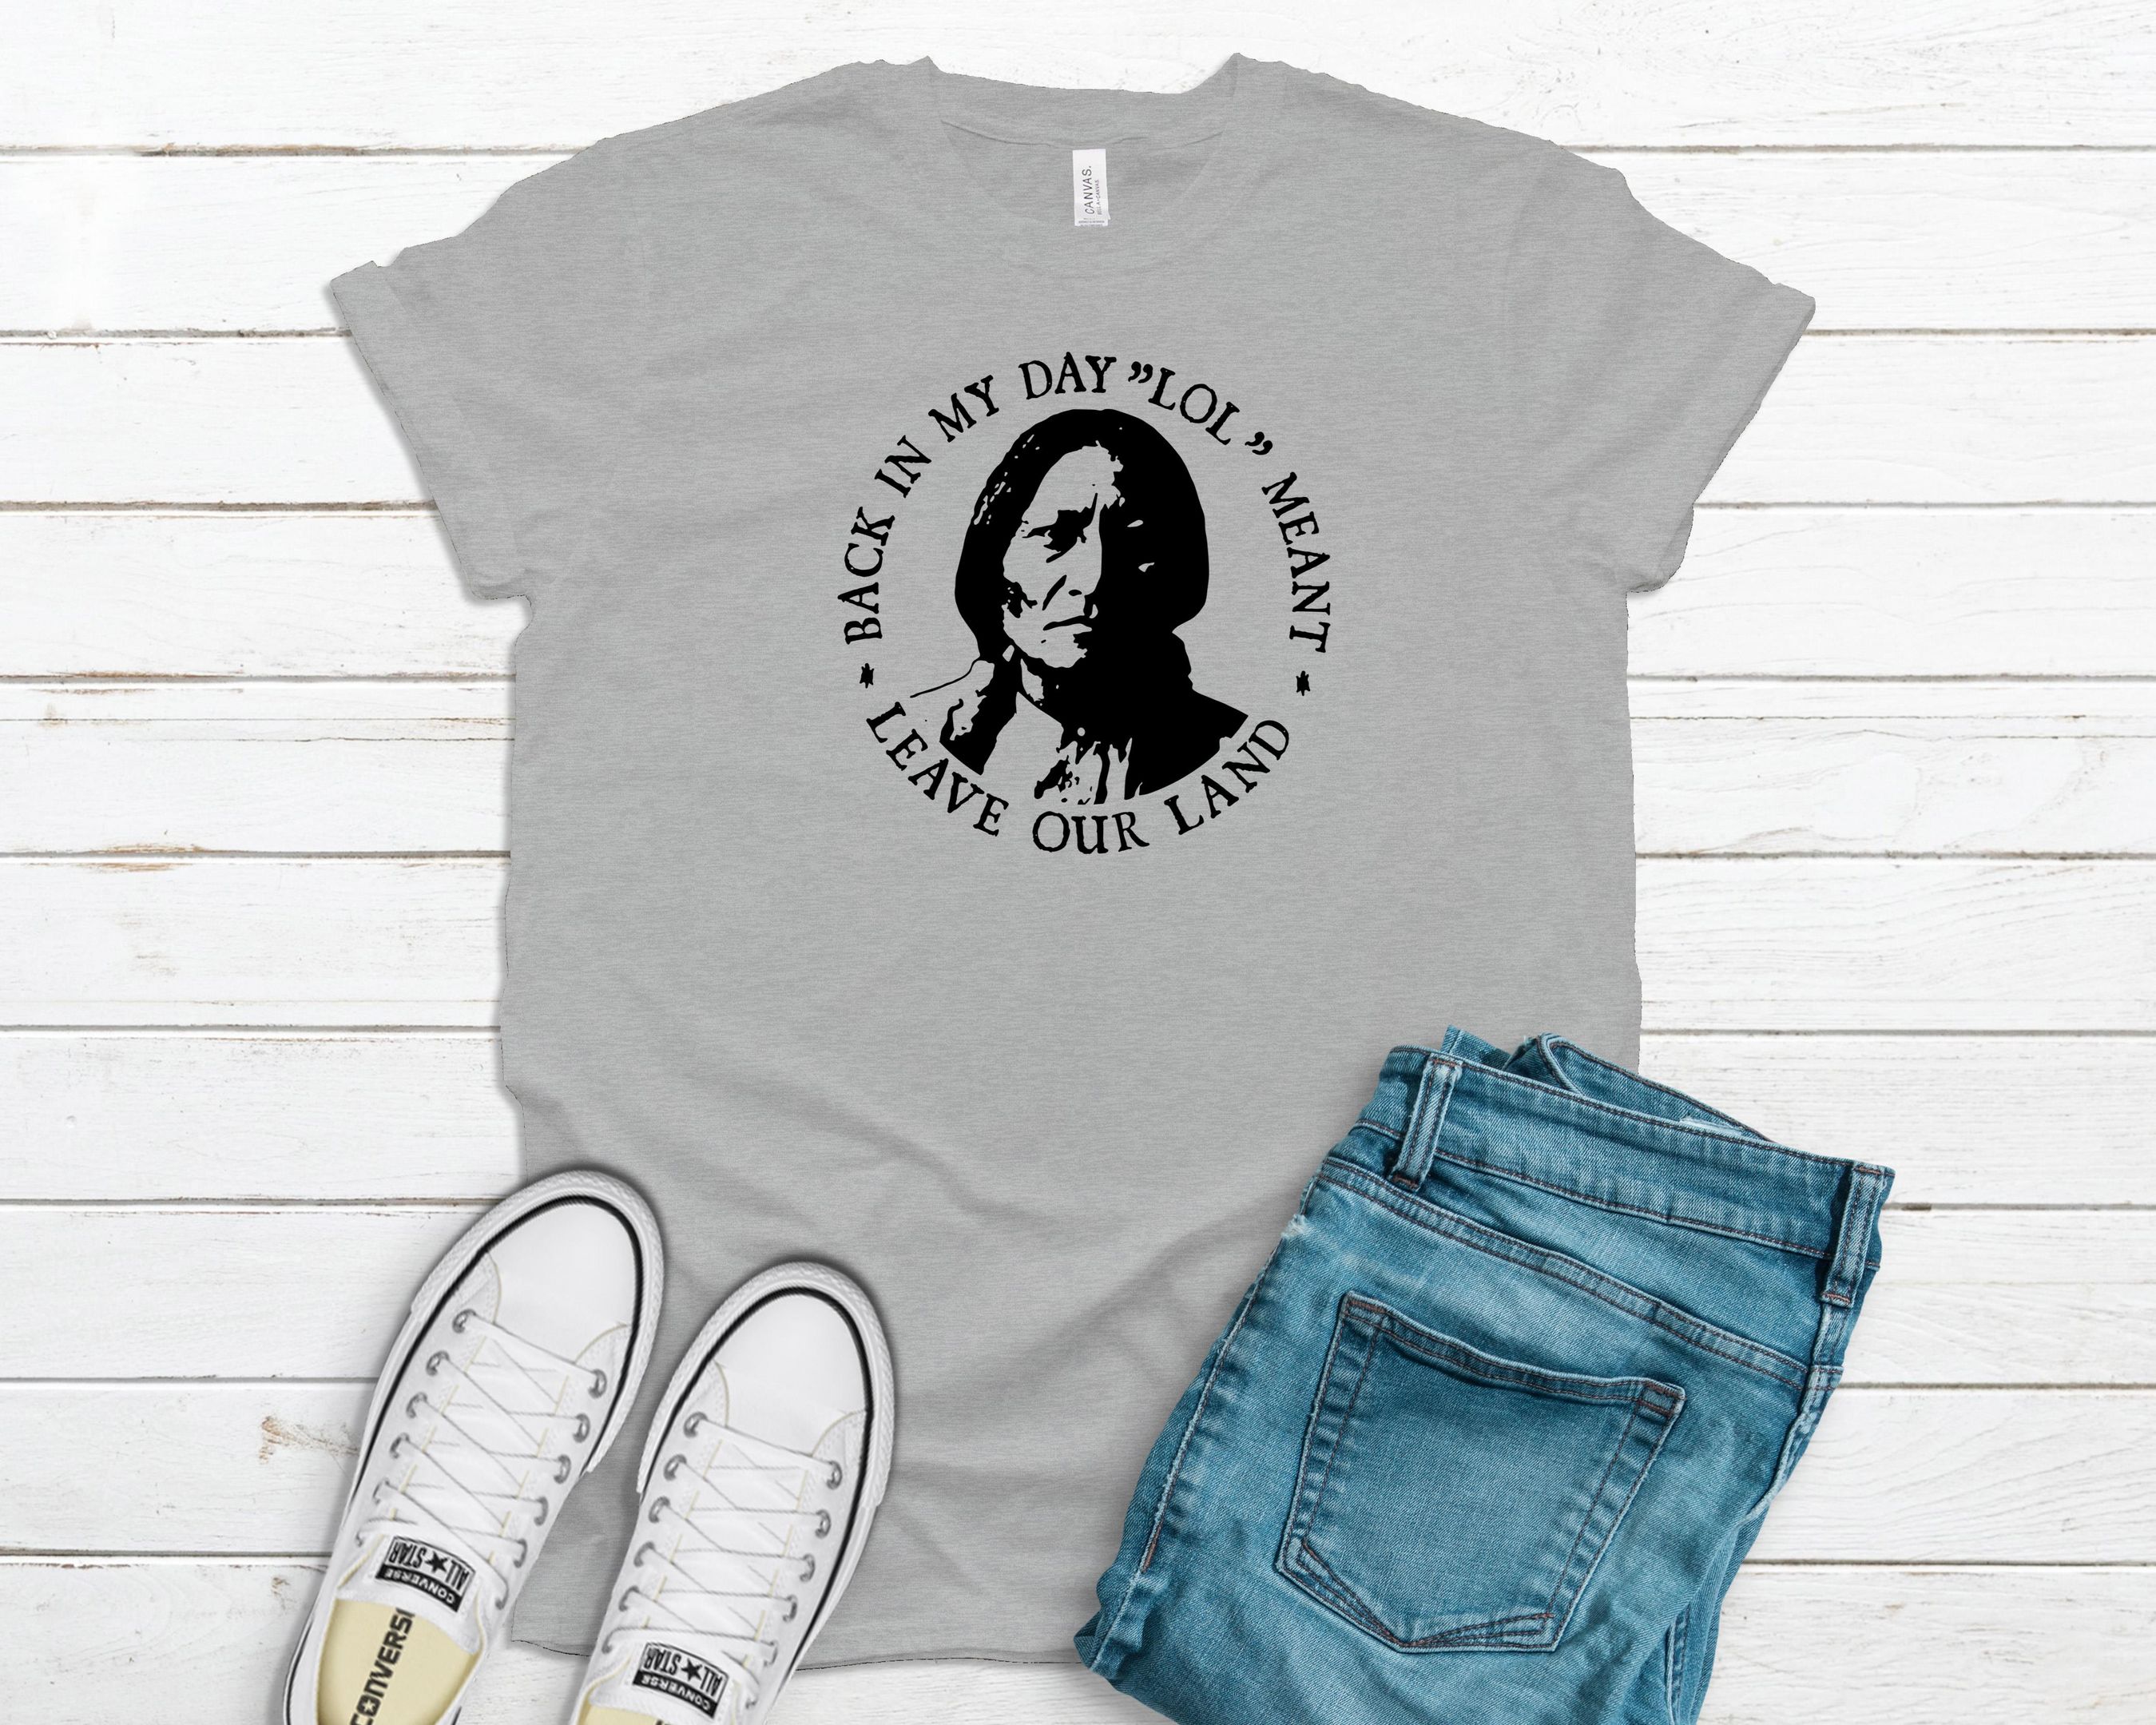 Back In My Day Shirt, Native T Shirt, Native American Shirt, Gift For Indigenous People